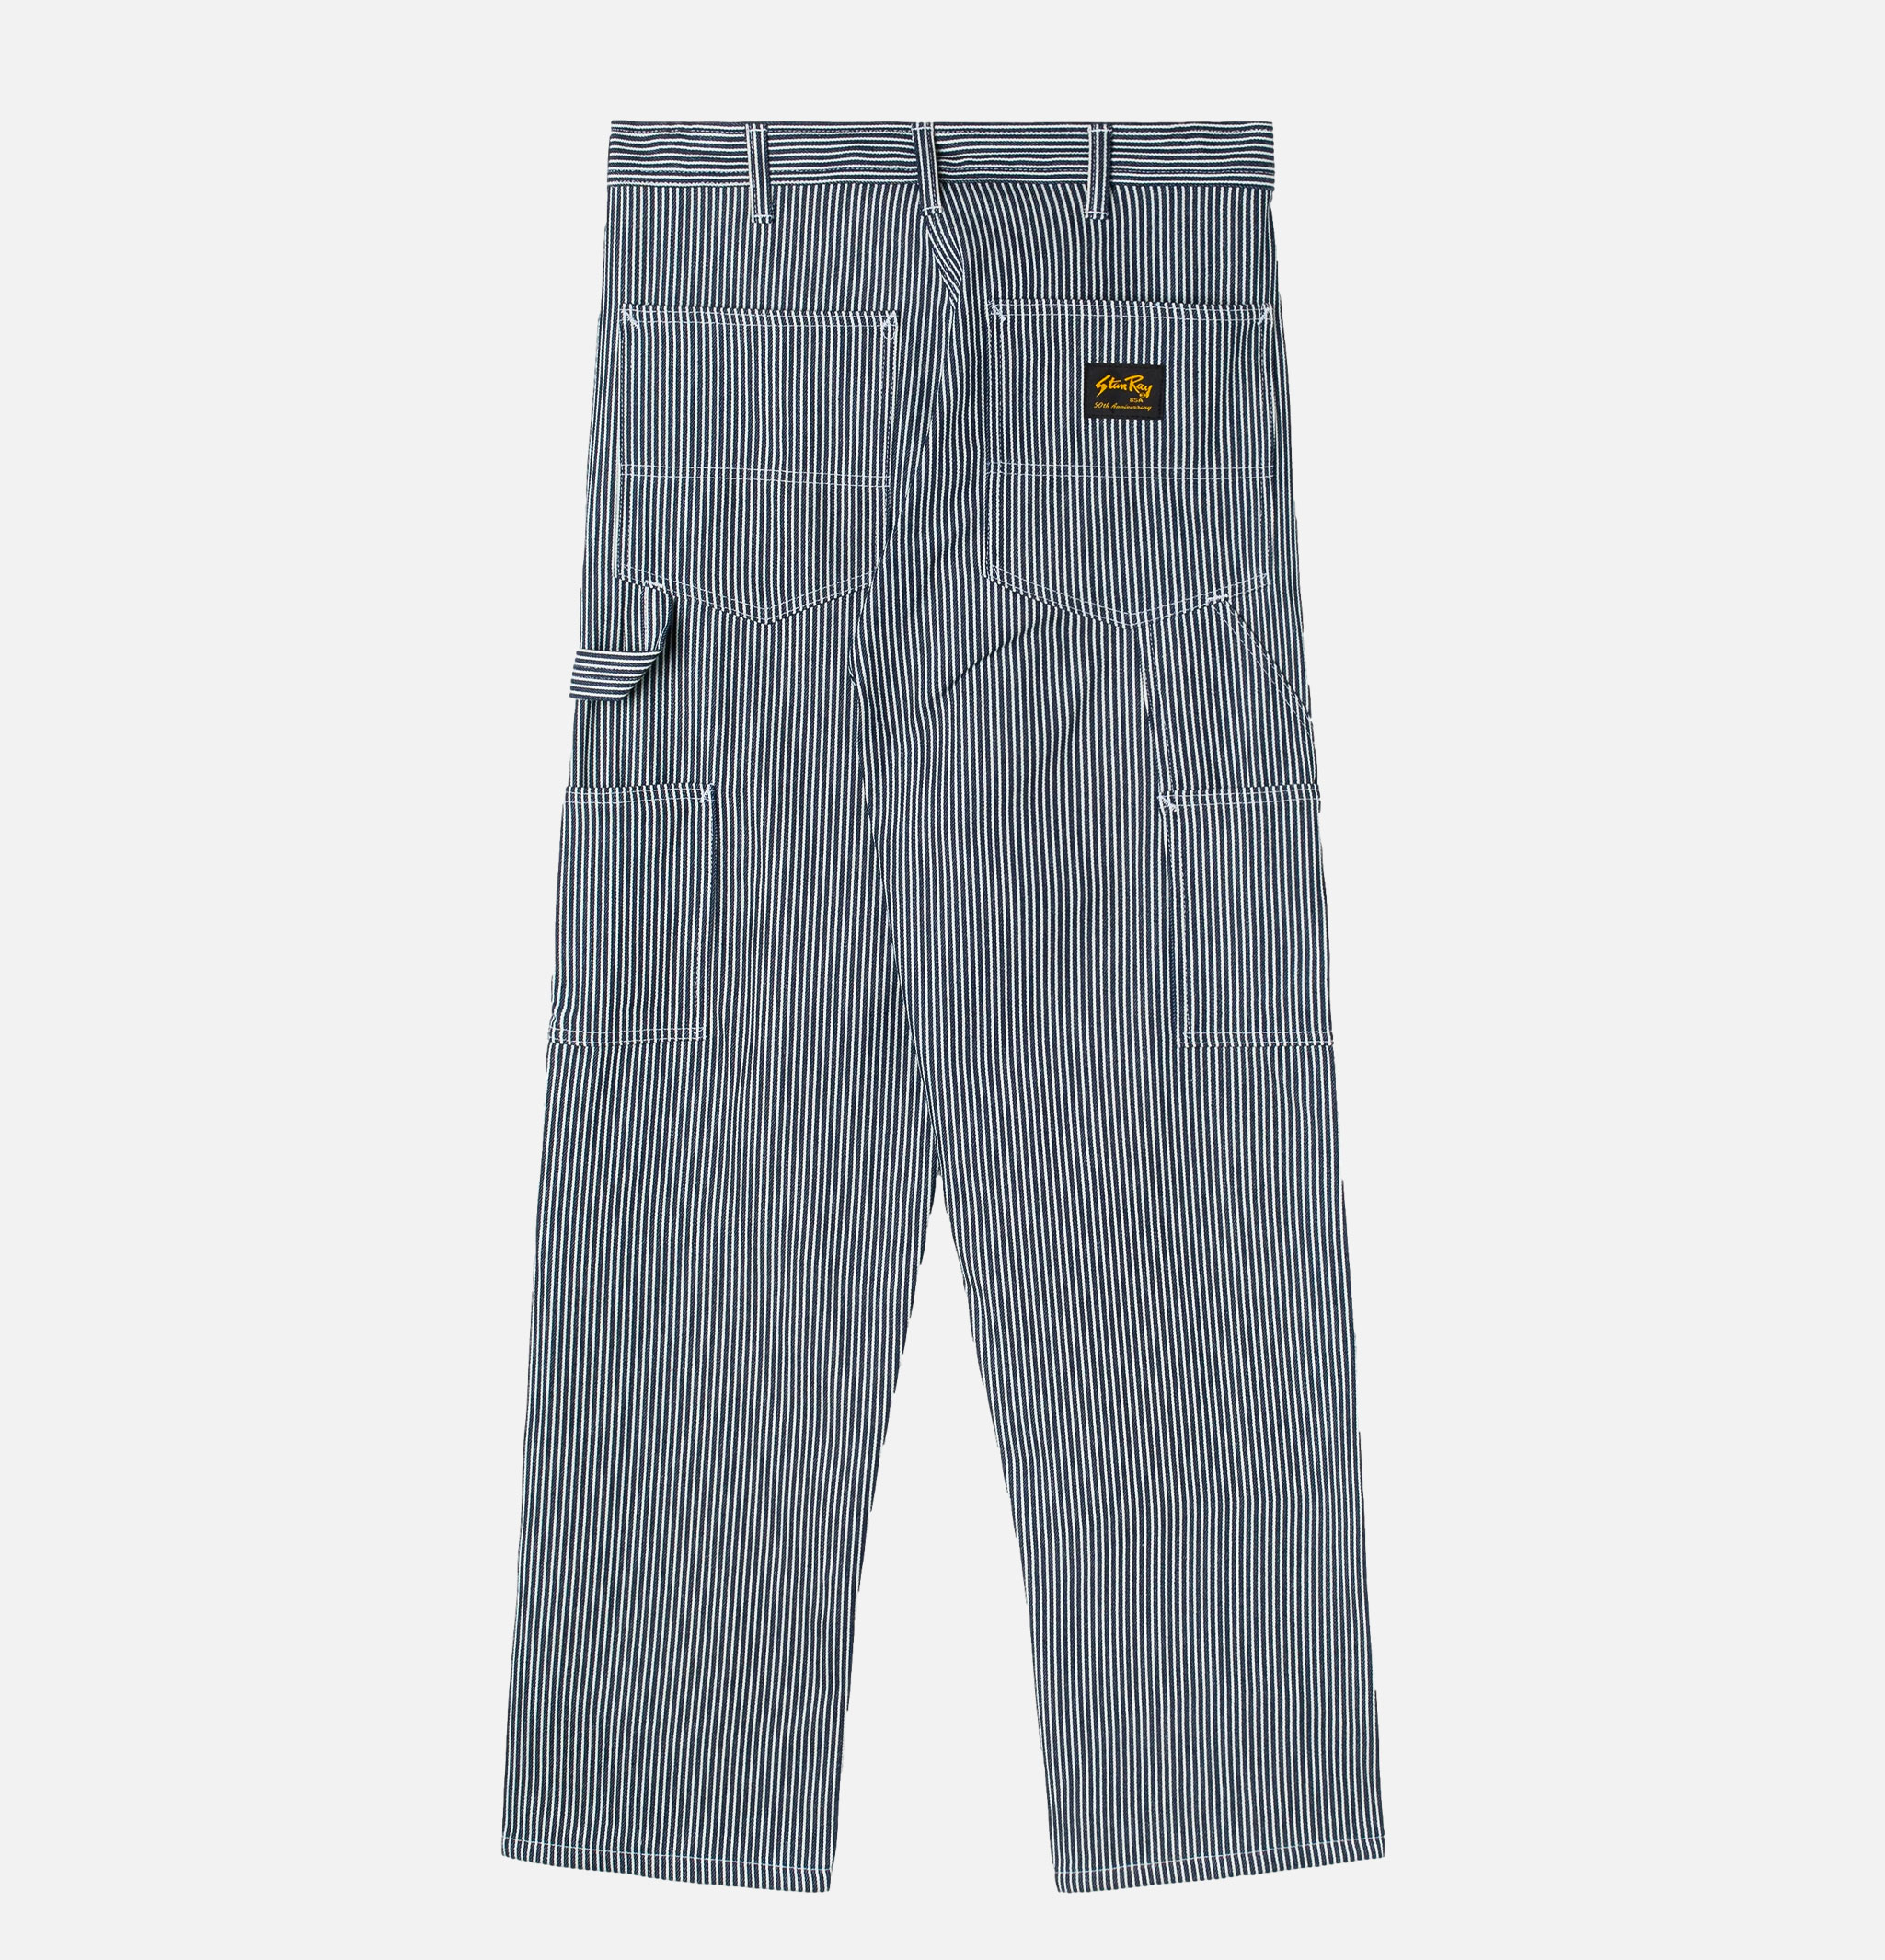 Painter Pant 80 Hickory